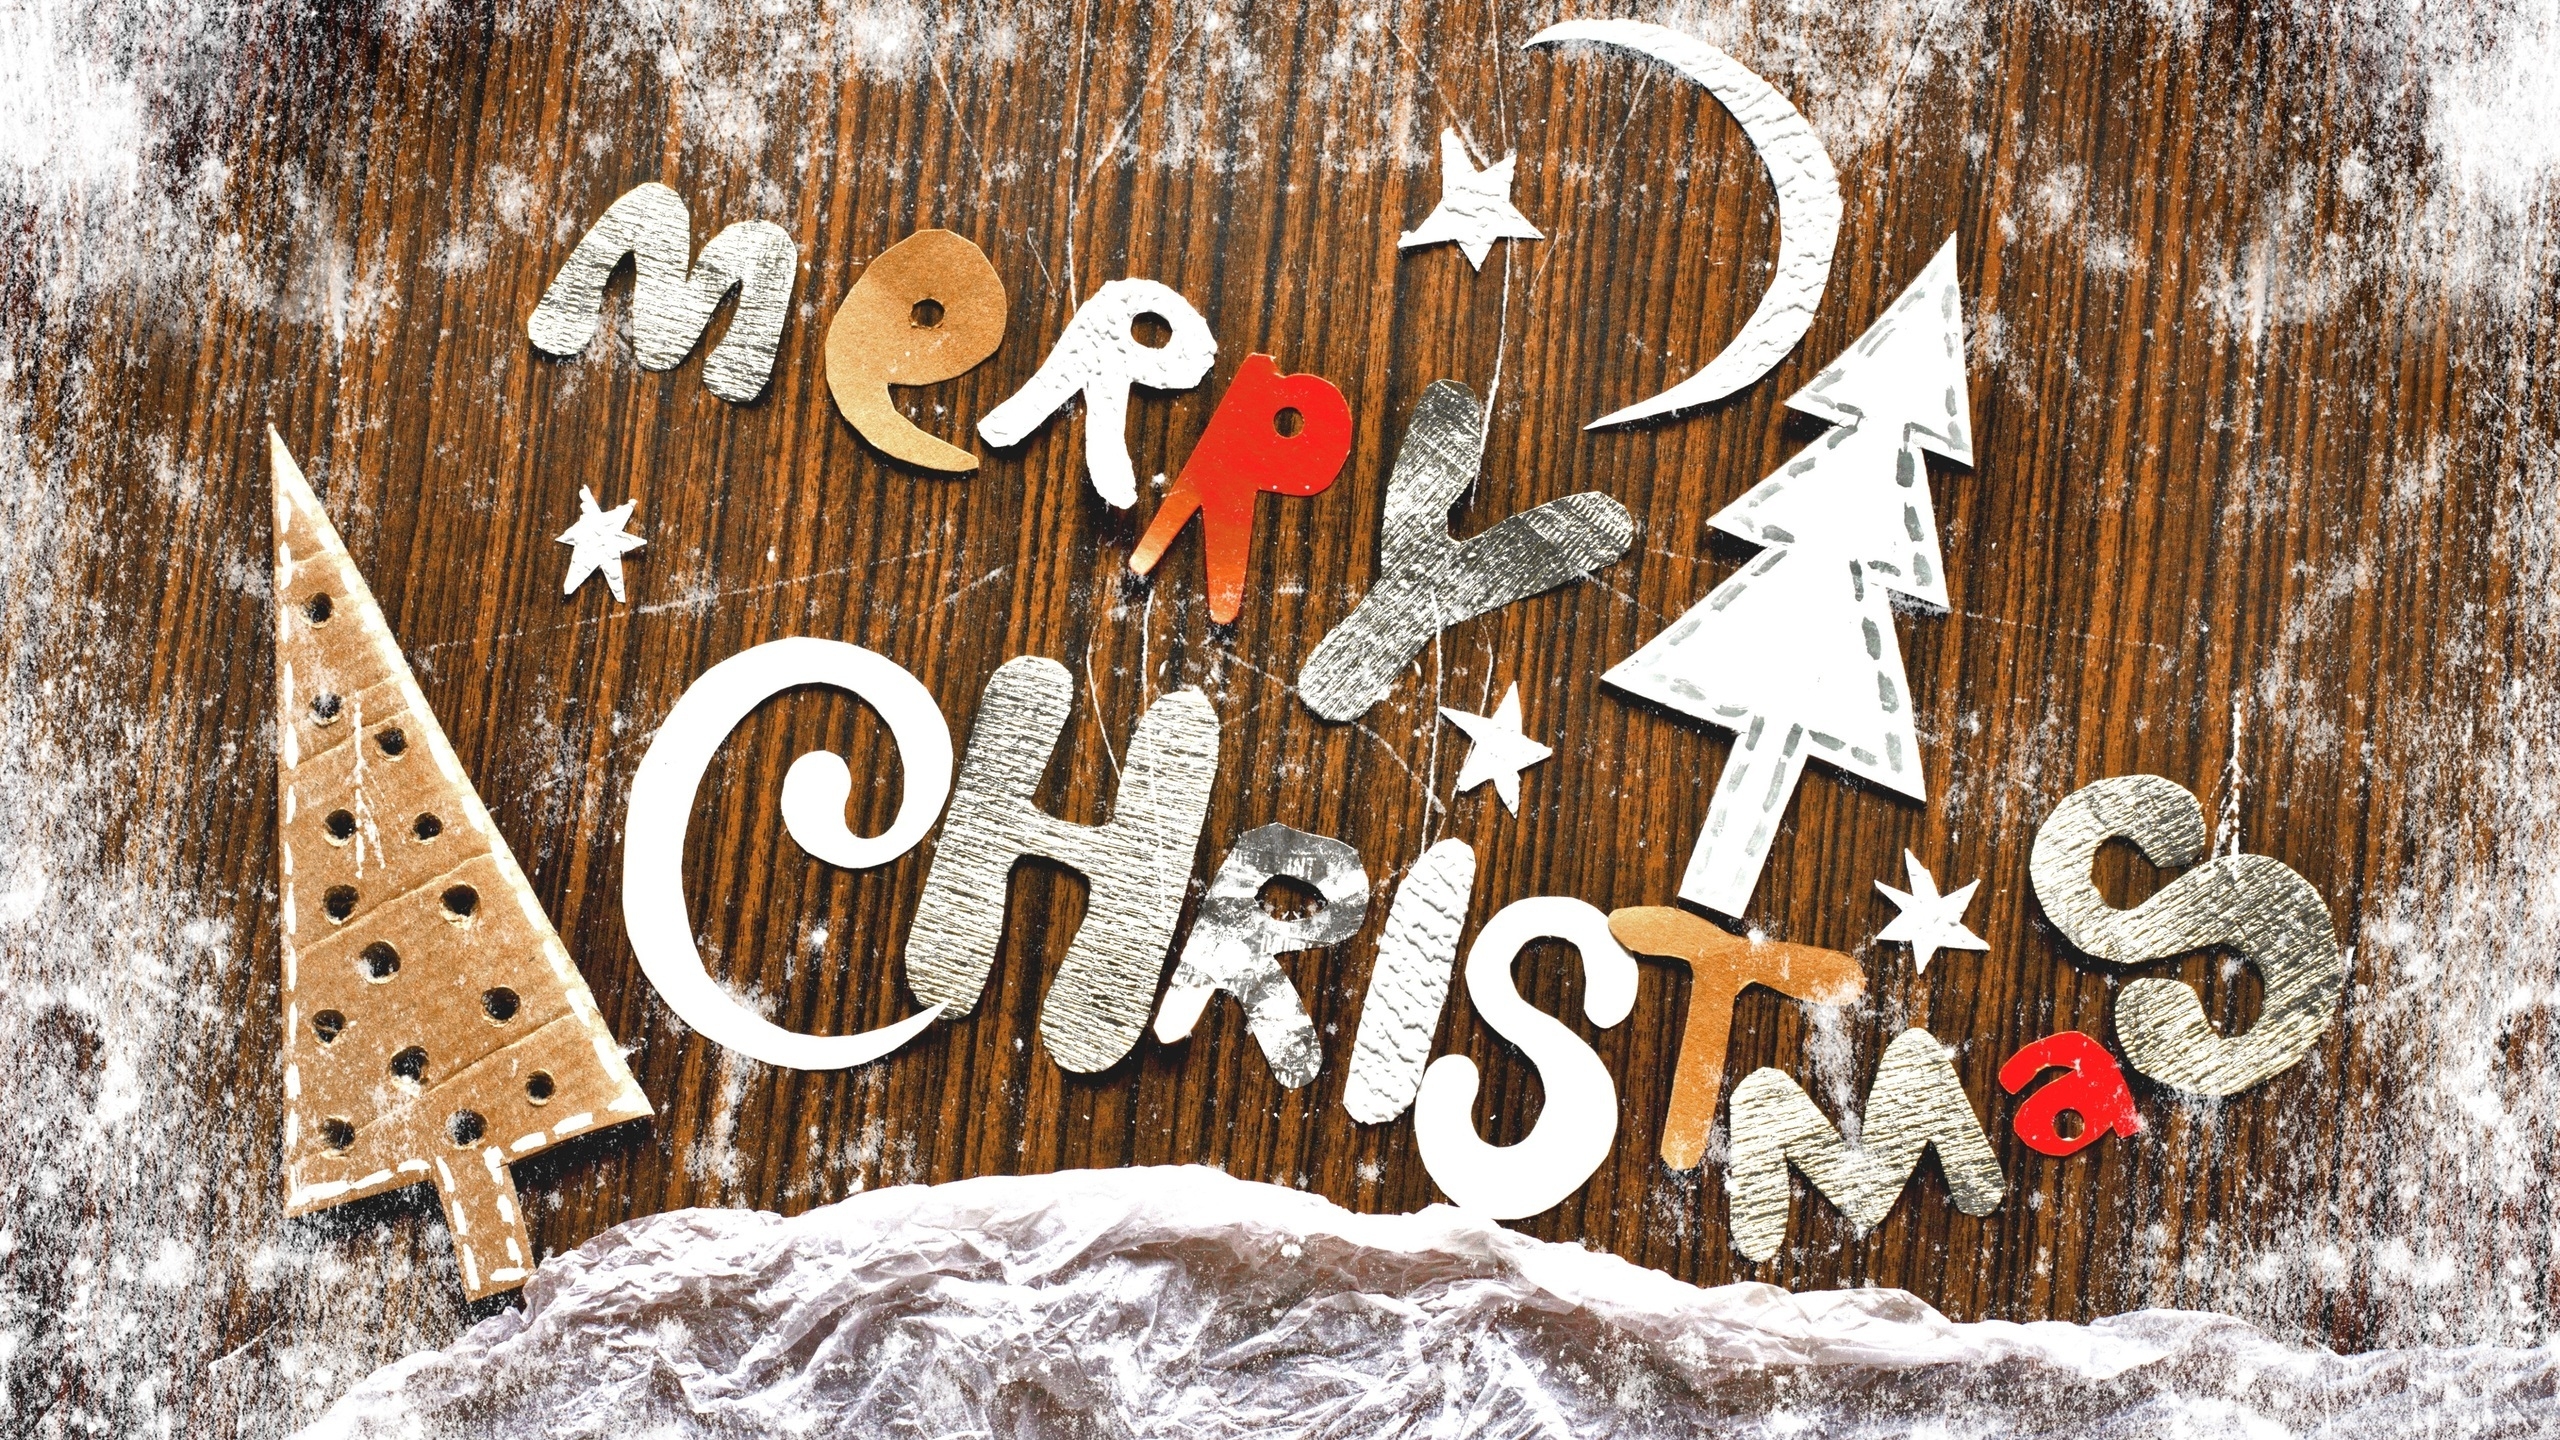 Merry Christmas Wish for 2560x1440 HDTV resolution